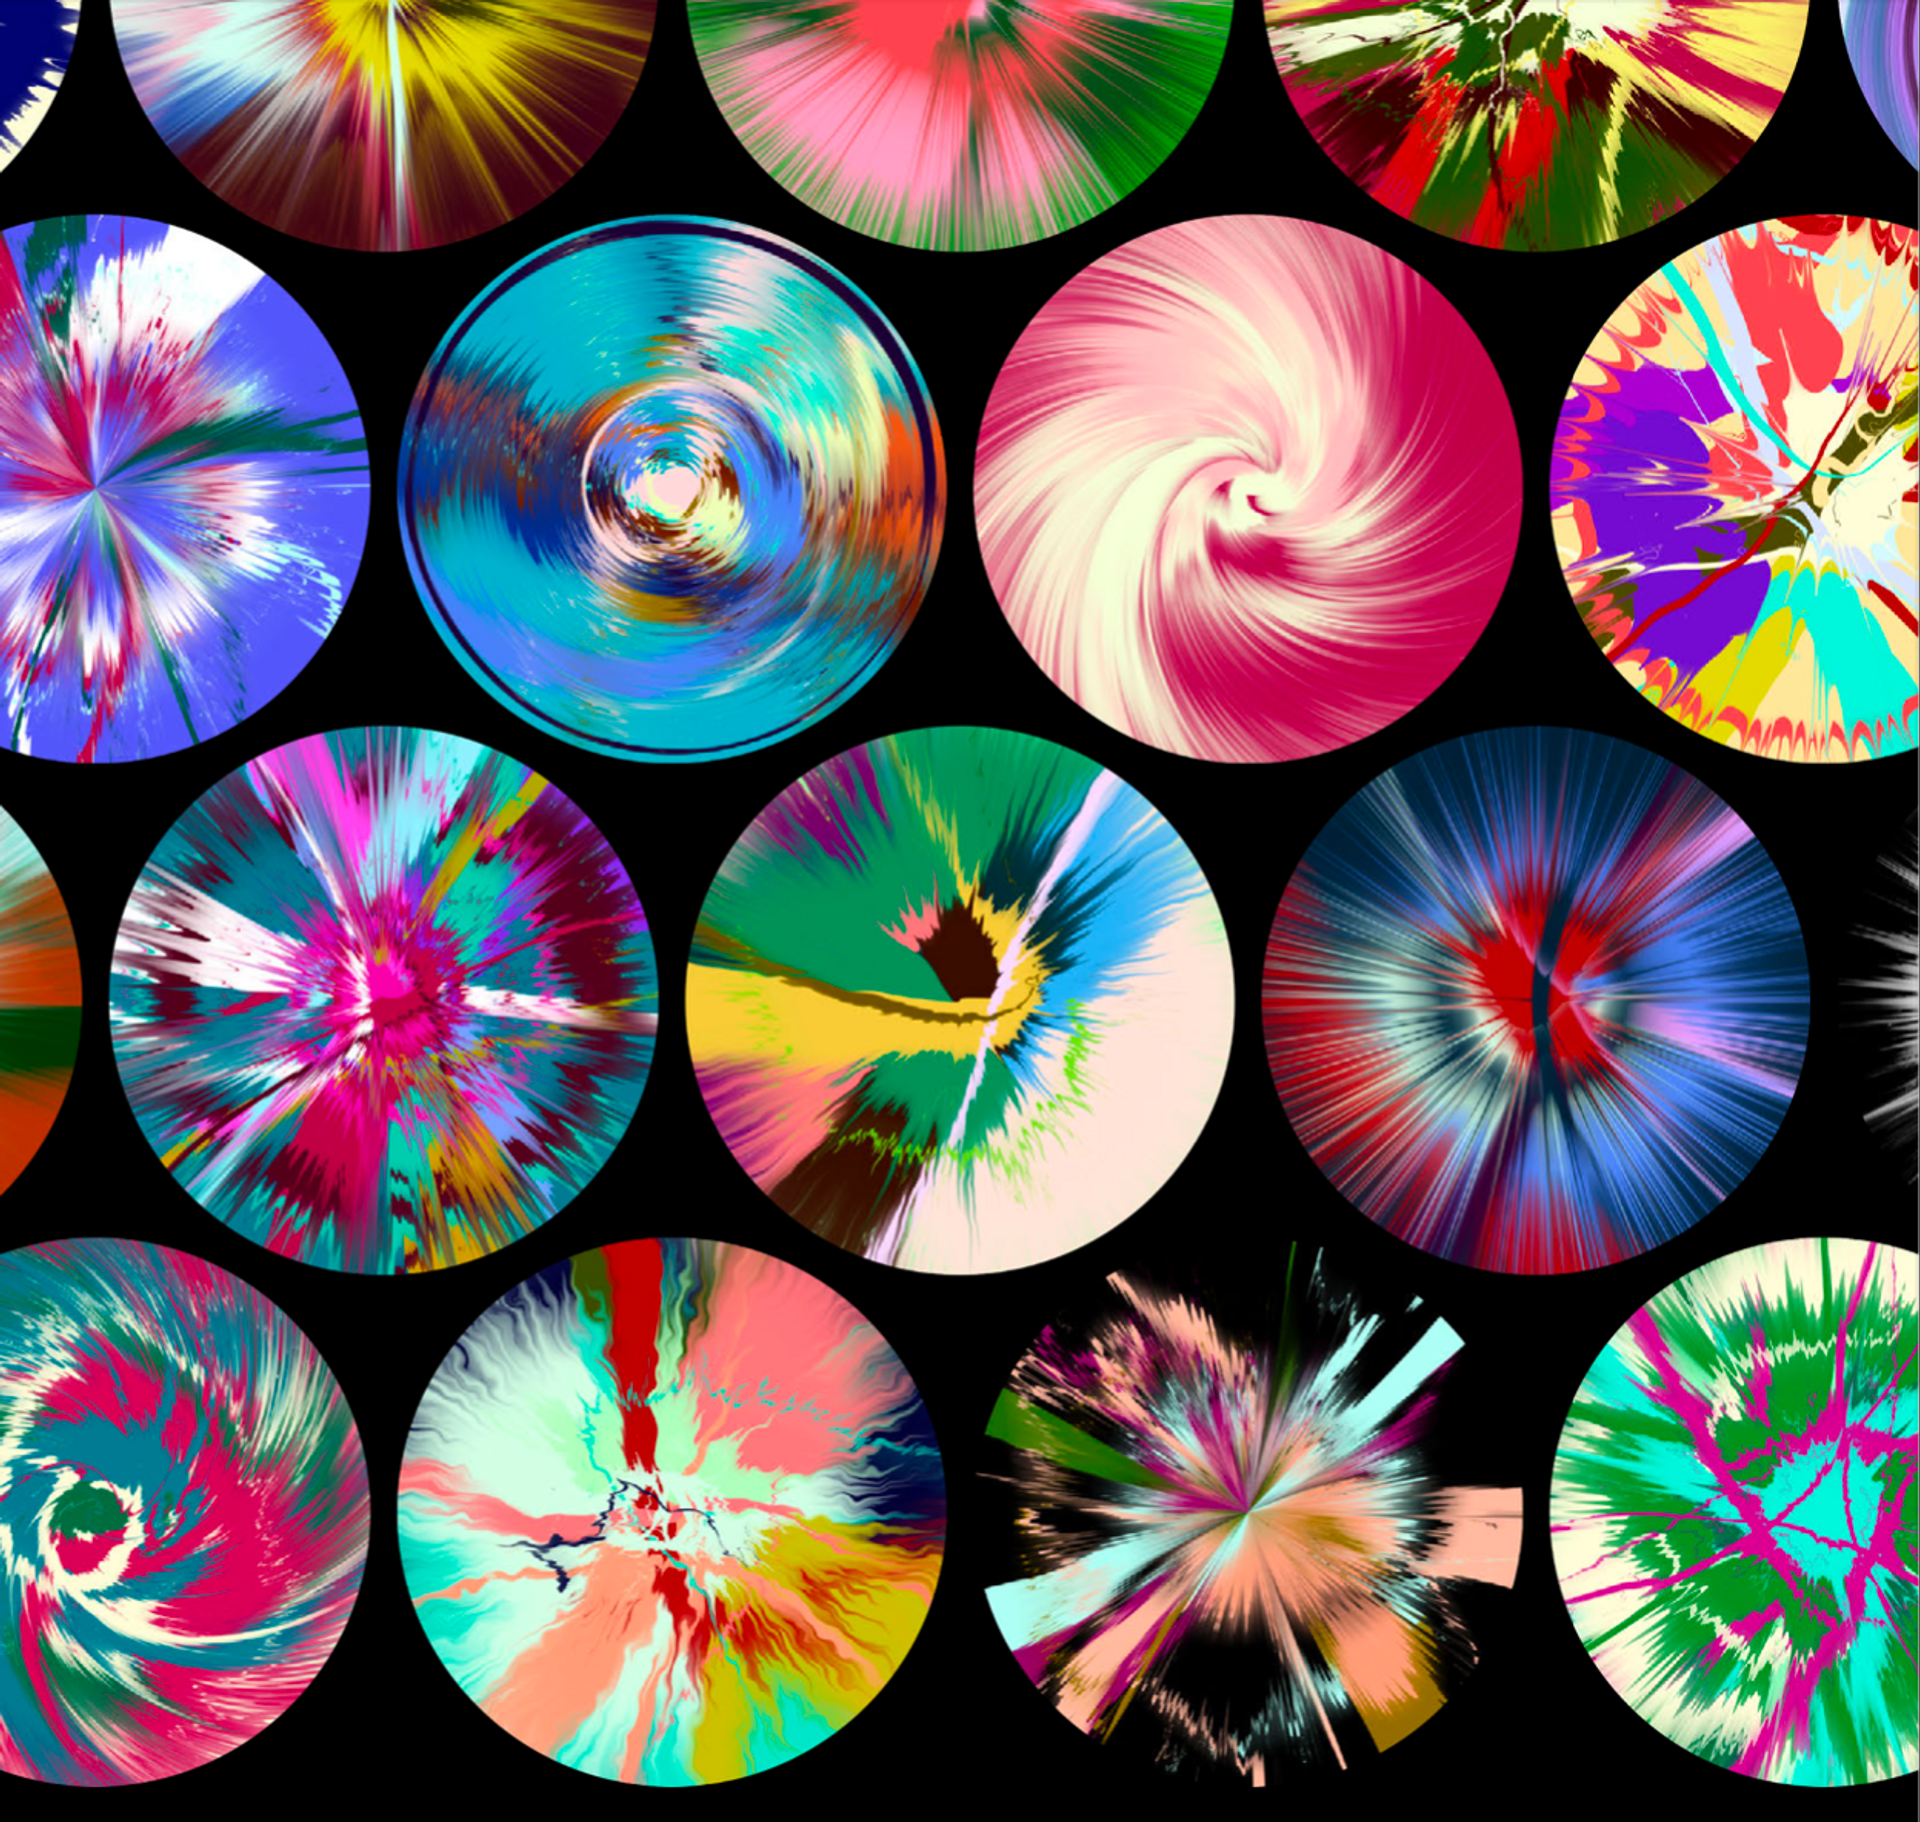 A series of Hirst's machine-generated spin paintings, in varying colour-ways and patterns. 